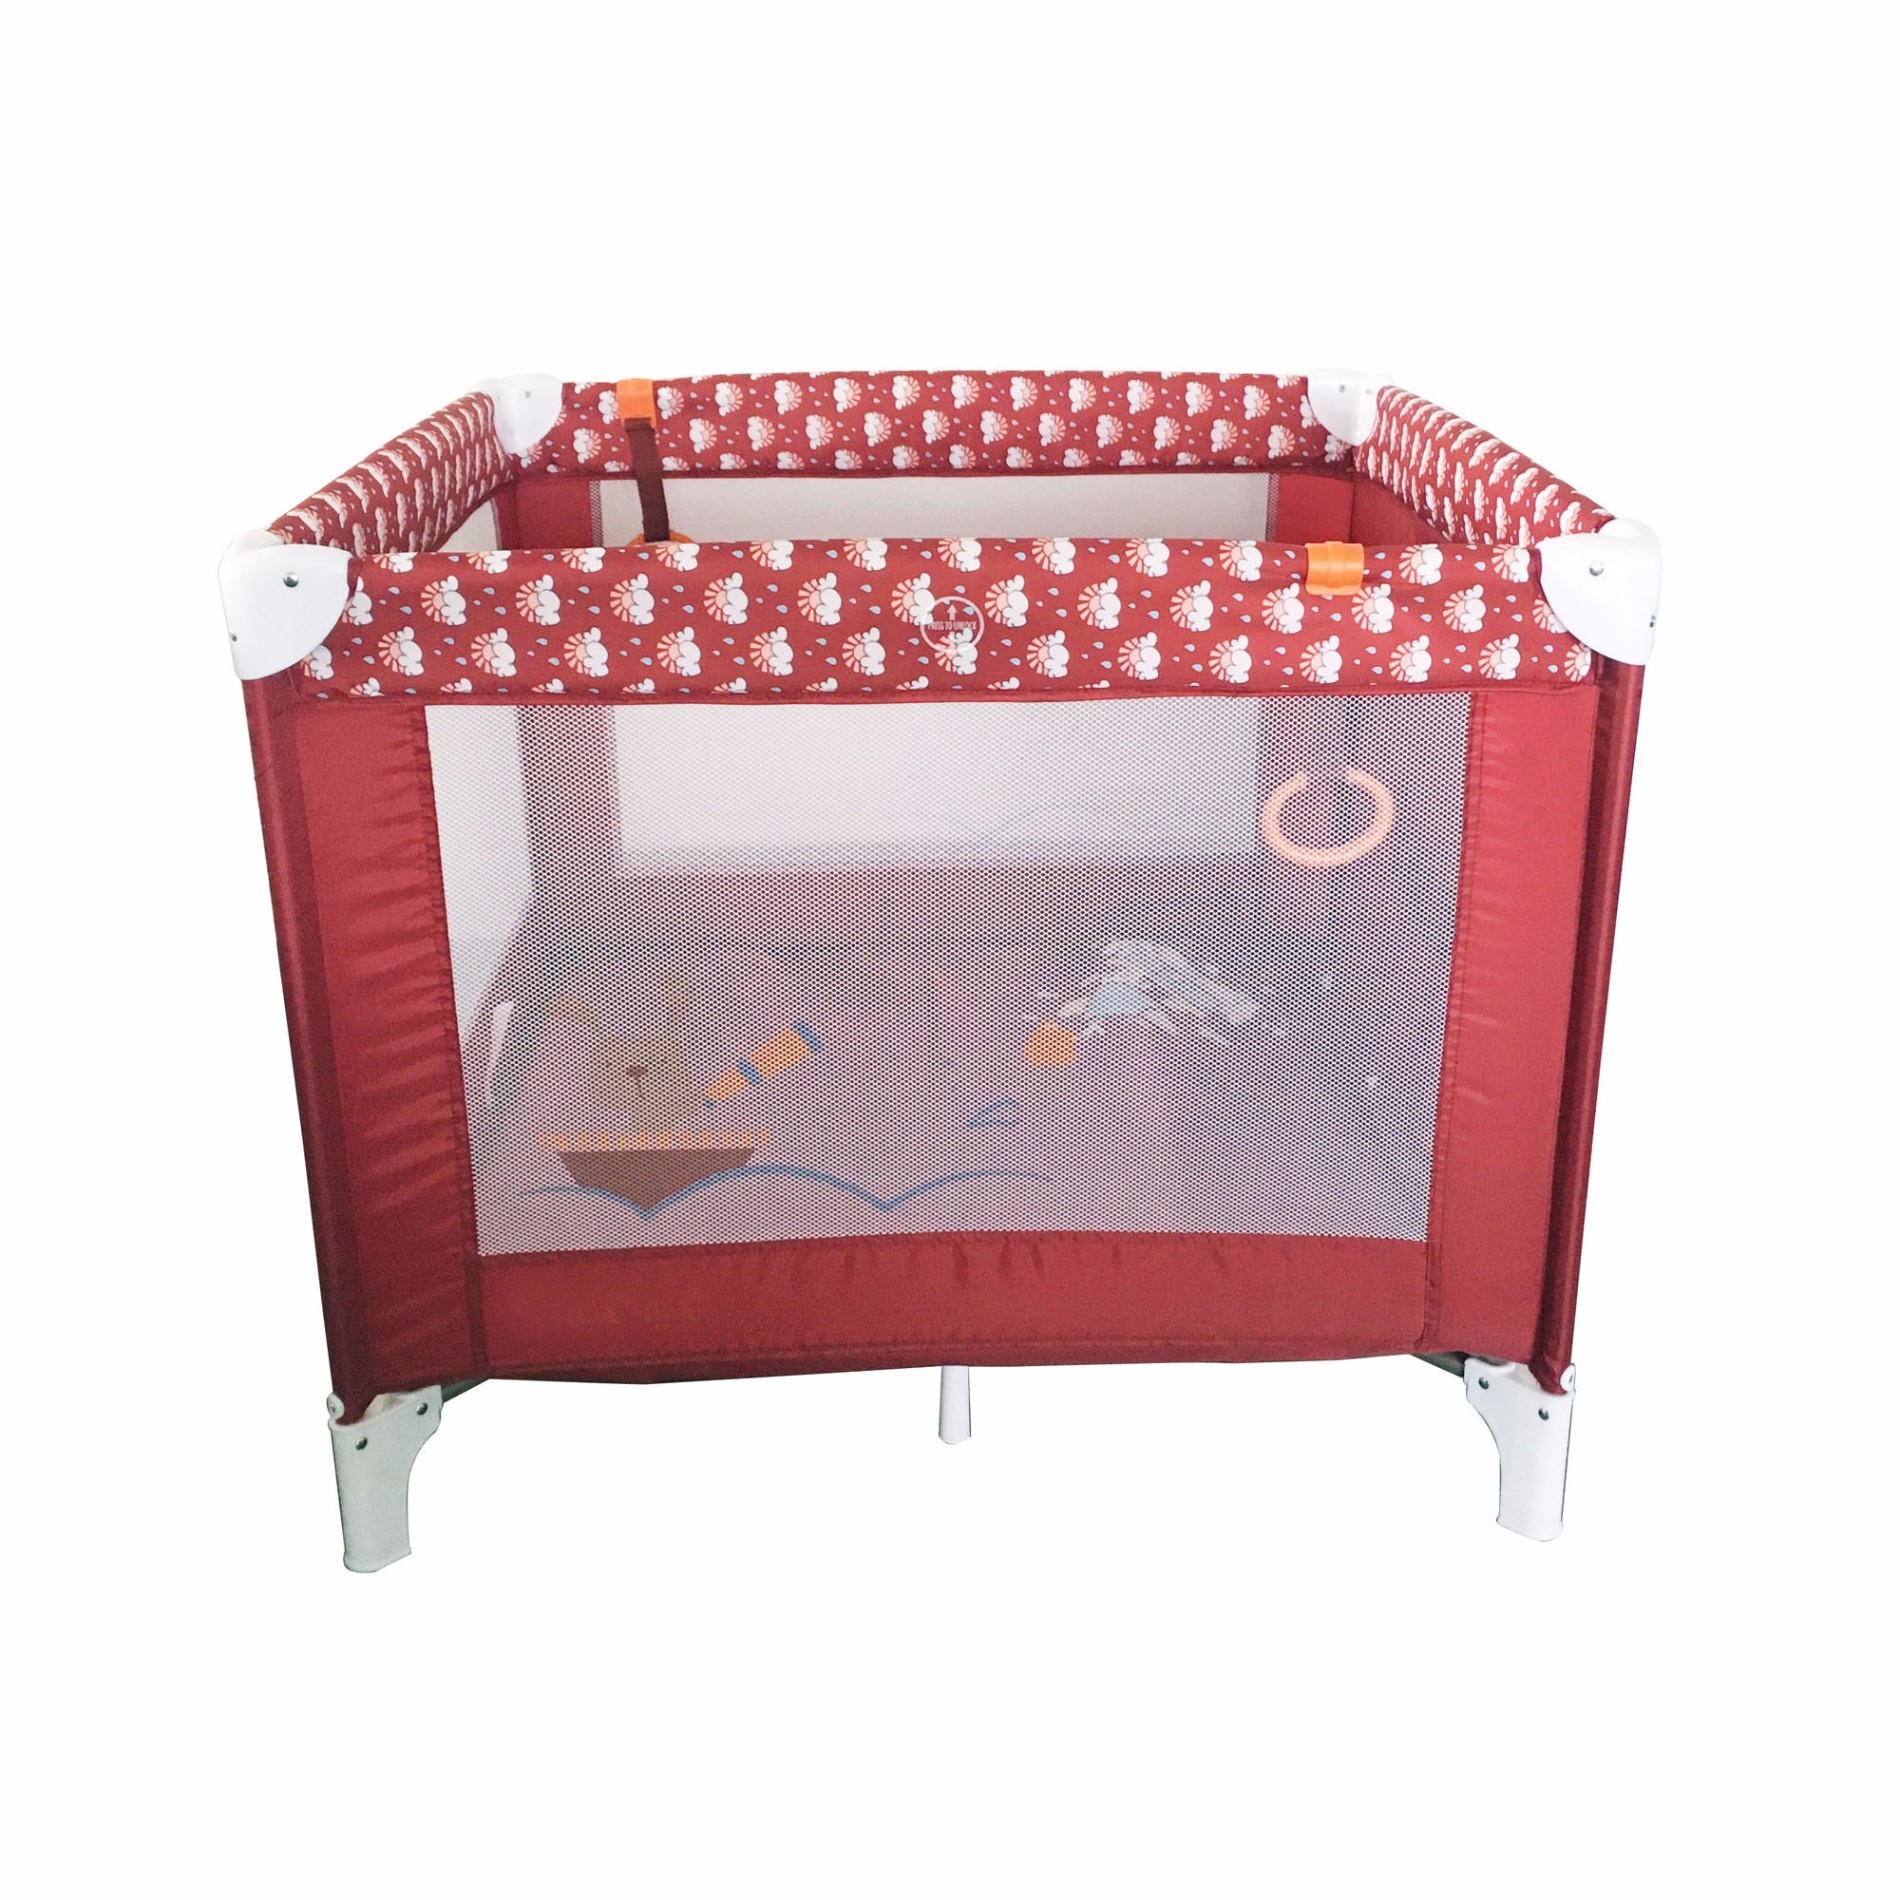 Large Travel Cot And Playpen Factory